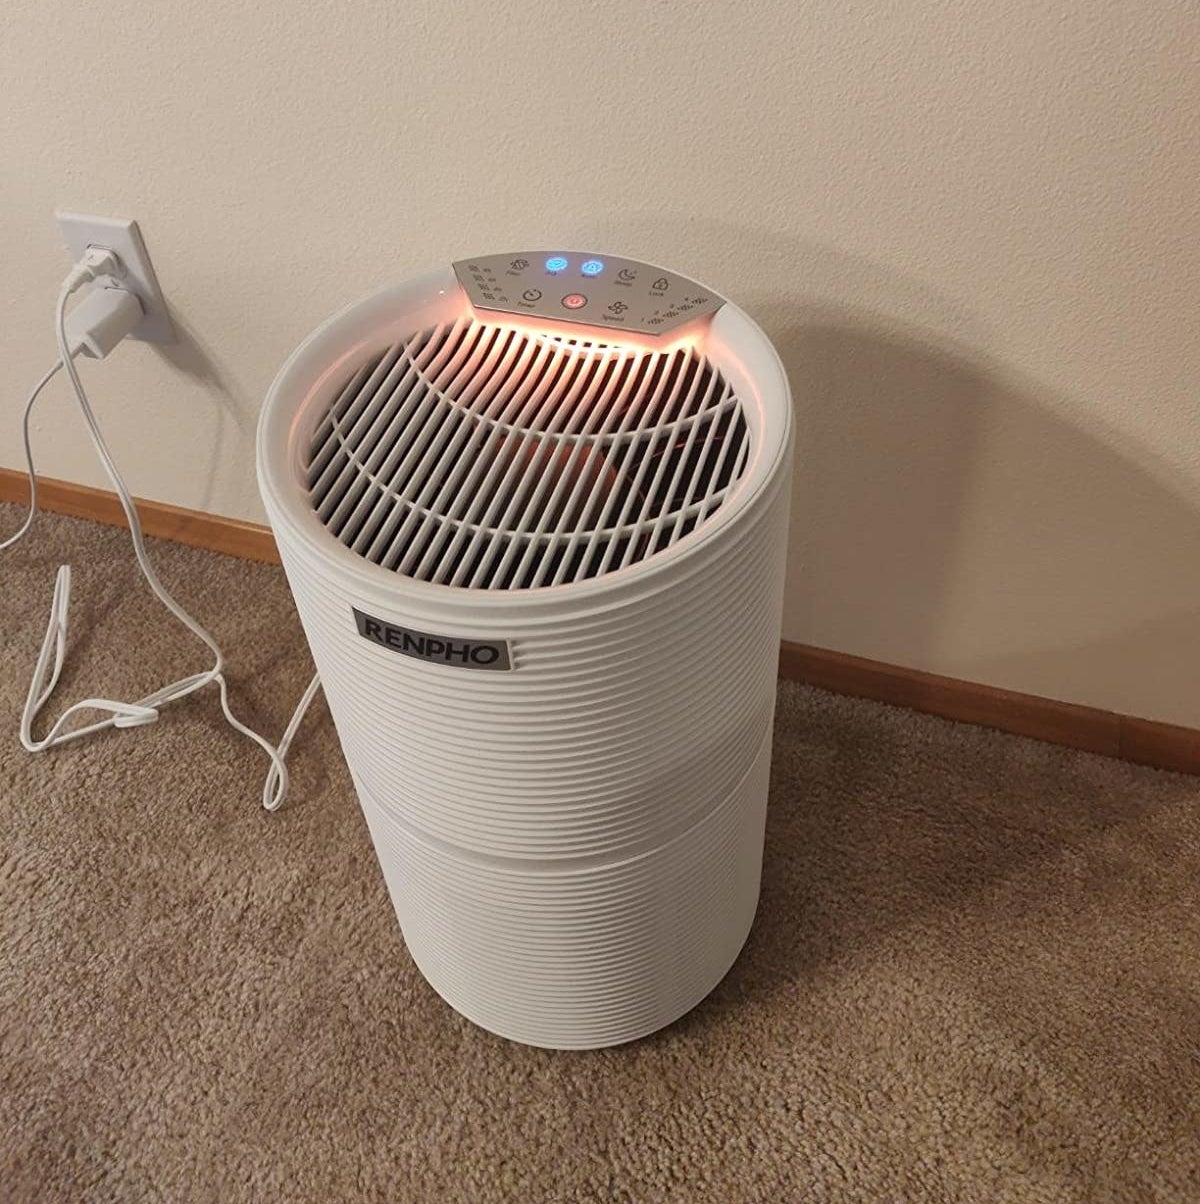 reviewer image of the white renpho air purifier sitting on carpet